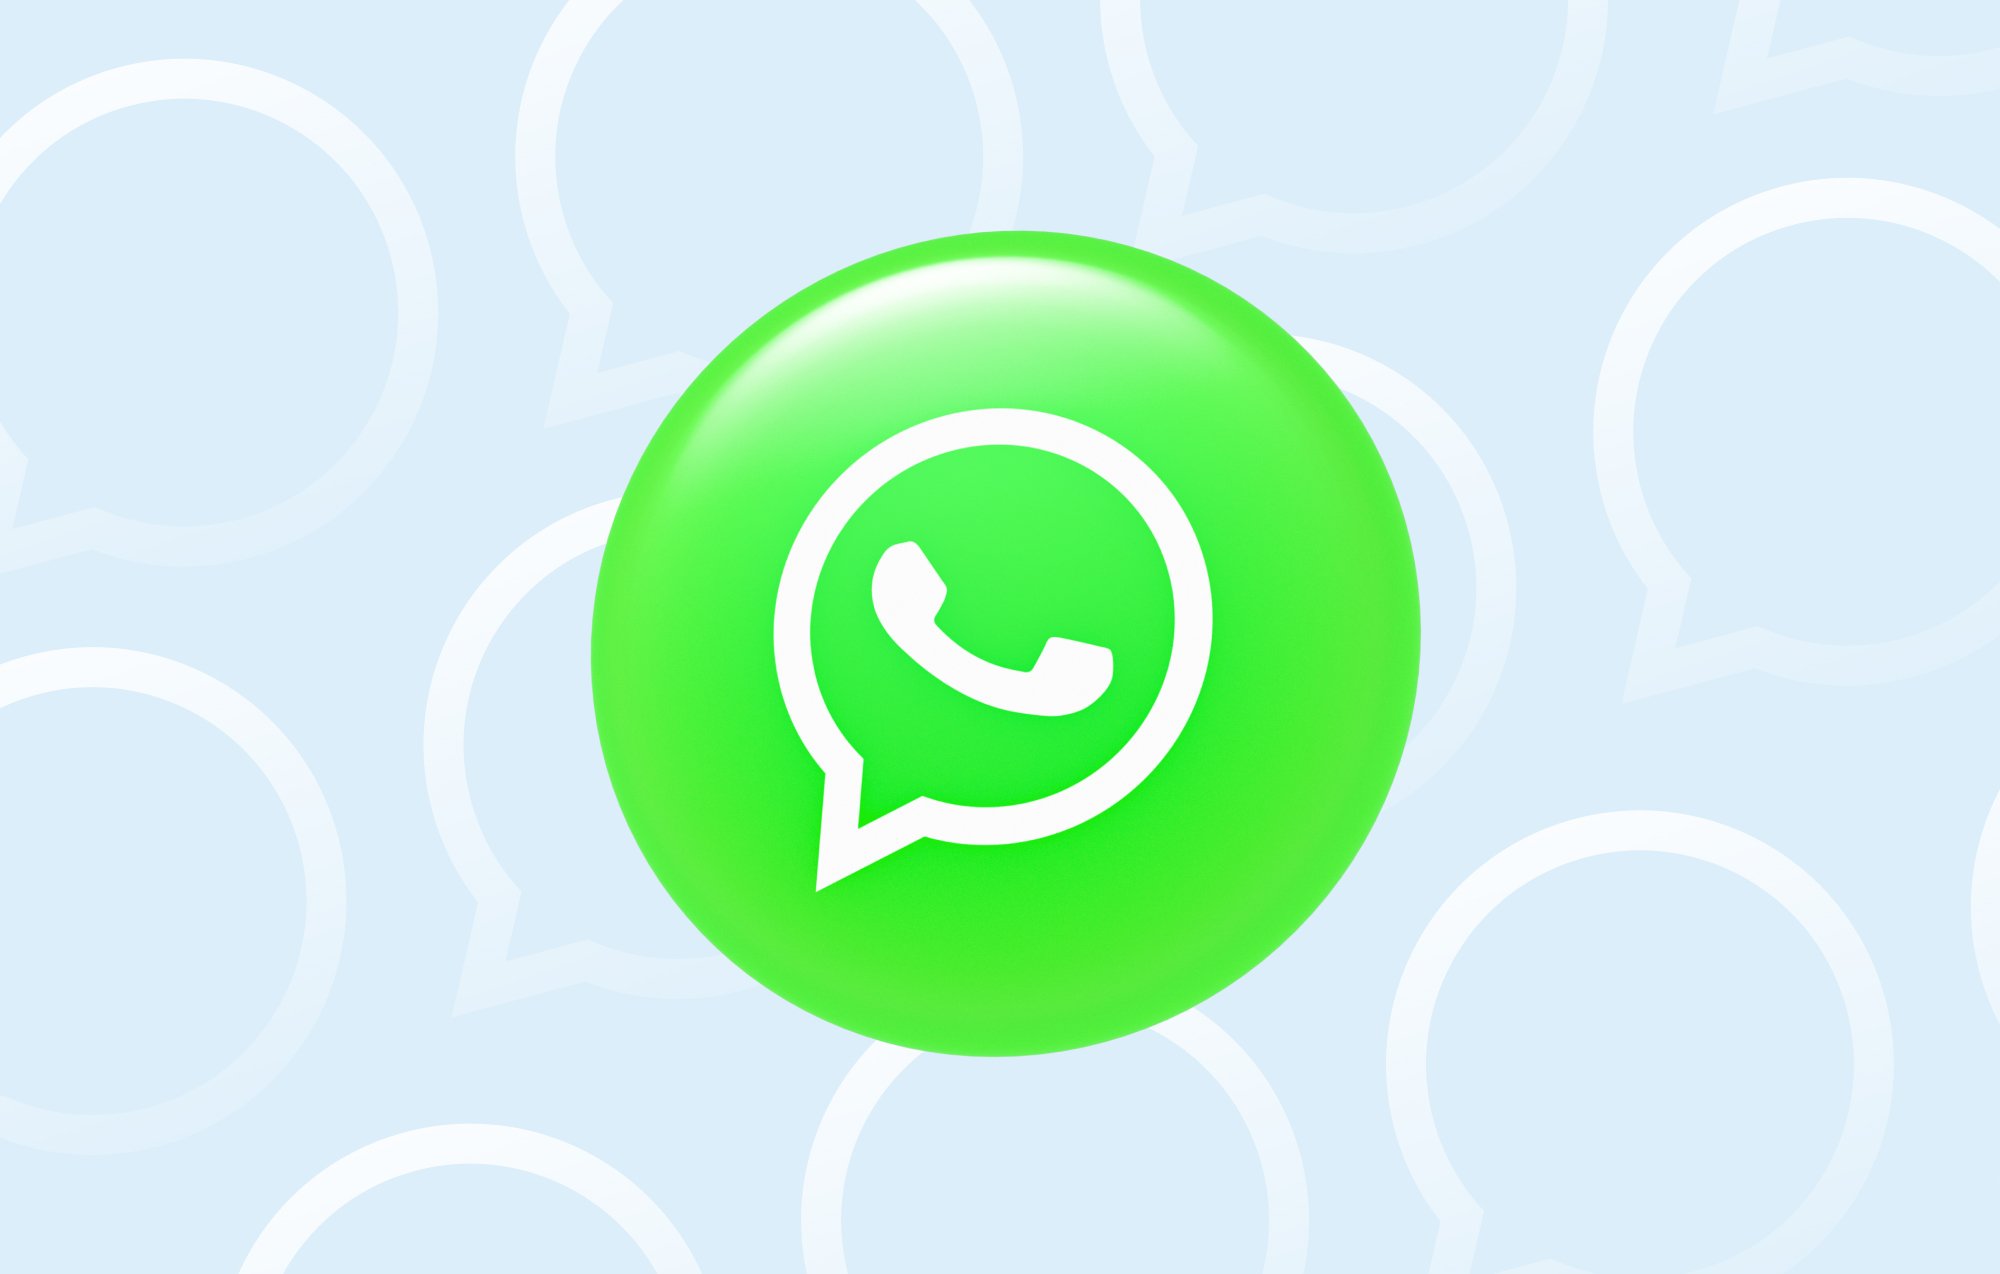 WhatsApp logo on background of blue chat bubbles